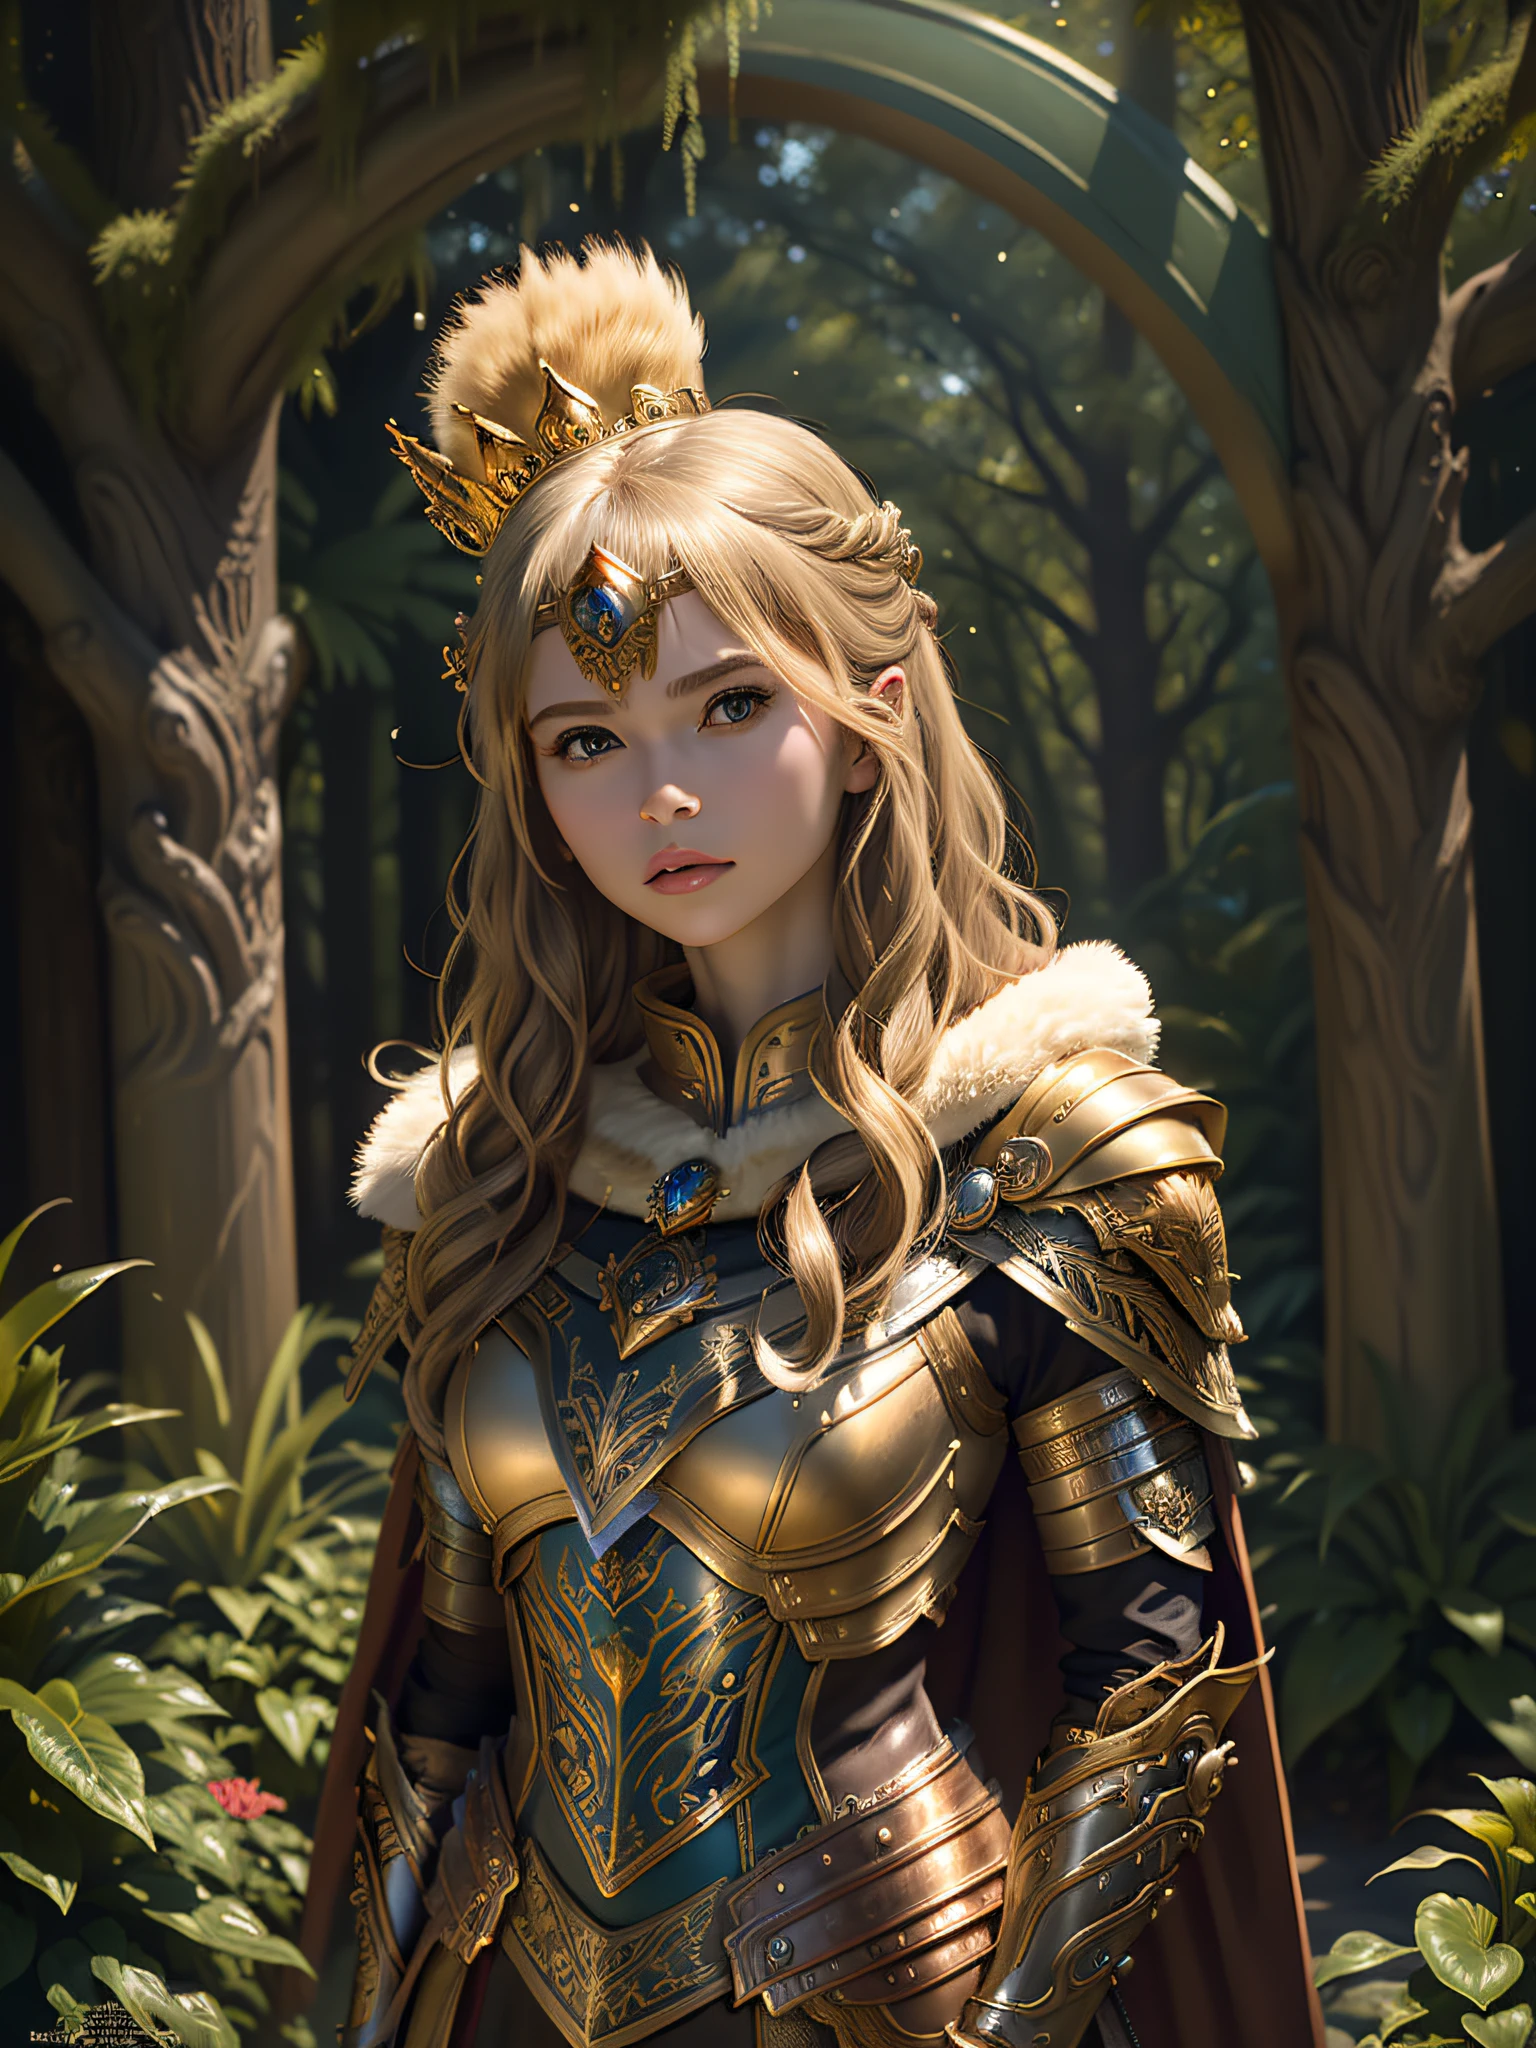 (Masterpiece, Top Quality, Top Quality, Official Art, Beautiful and Aesthetic: 1.2), (1 Girl), (Warrior Queen Golden Armor, Fur-Lined Cape, Bejeweled Crown: 1.2), Serious, Blonde, Colossal, Ultimate Jewel, 100 Pieces, Gorgeous, Photo